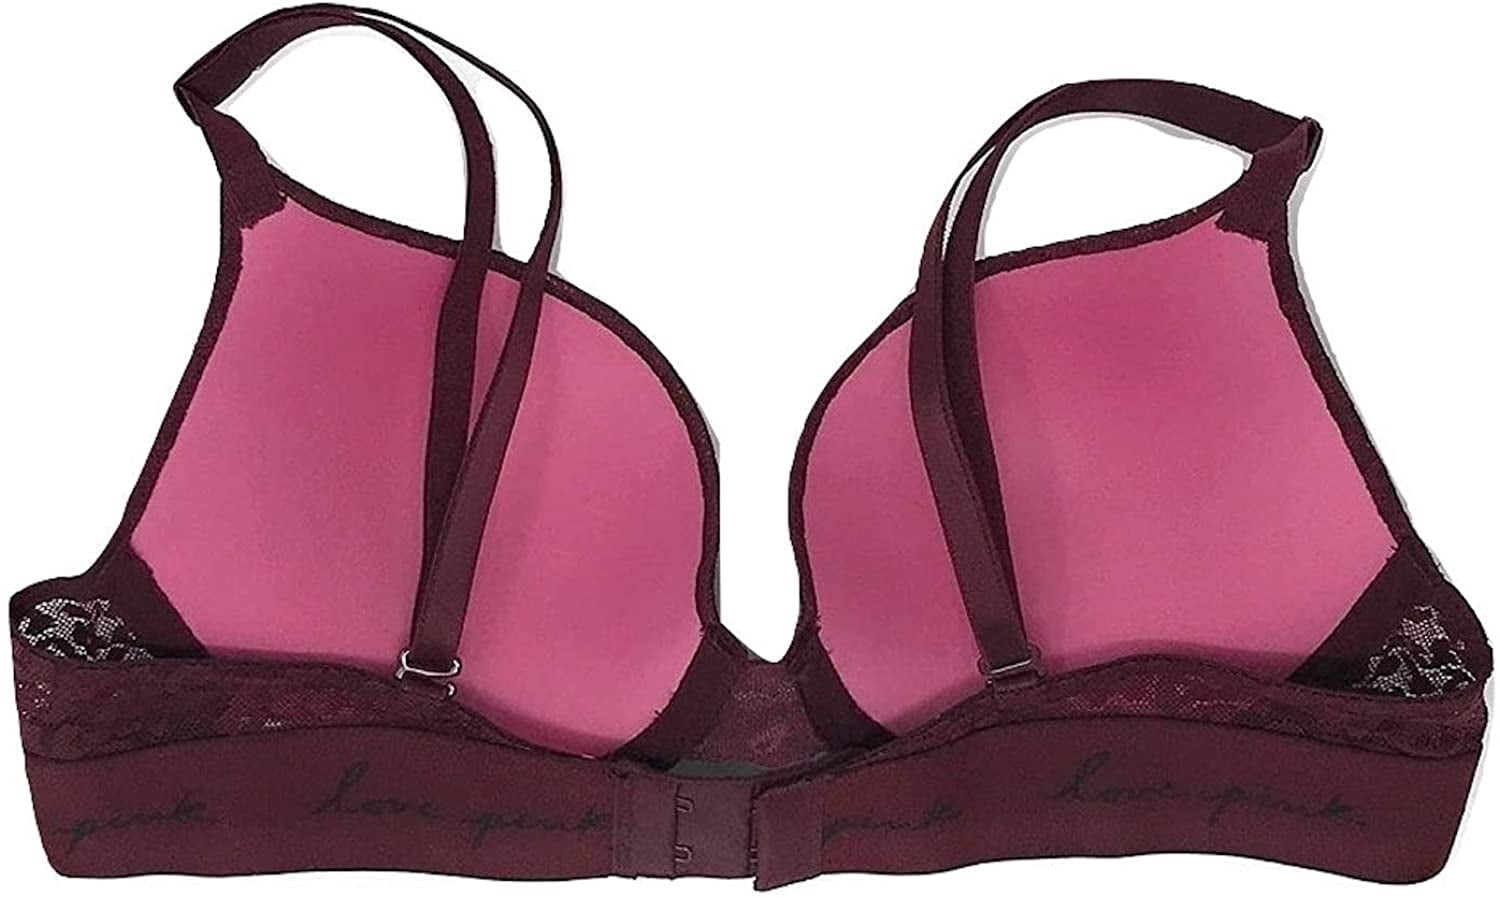 Victoria's Secret Pink Wear Everywhere Lace Push Up Bra Color Ruby